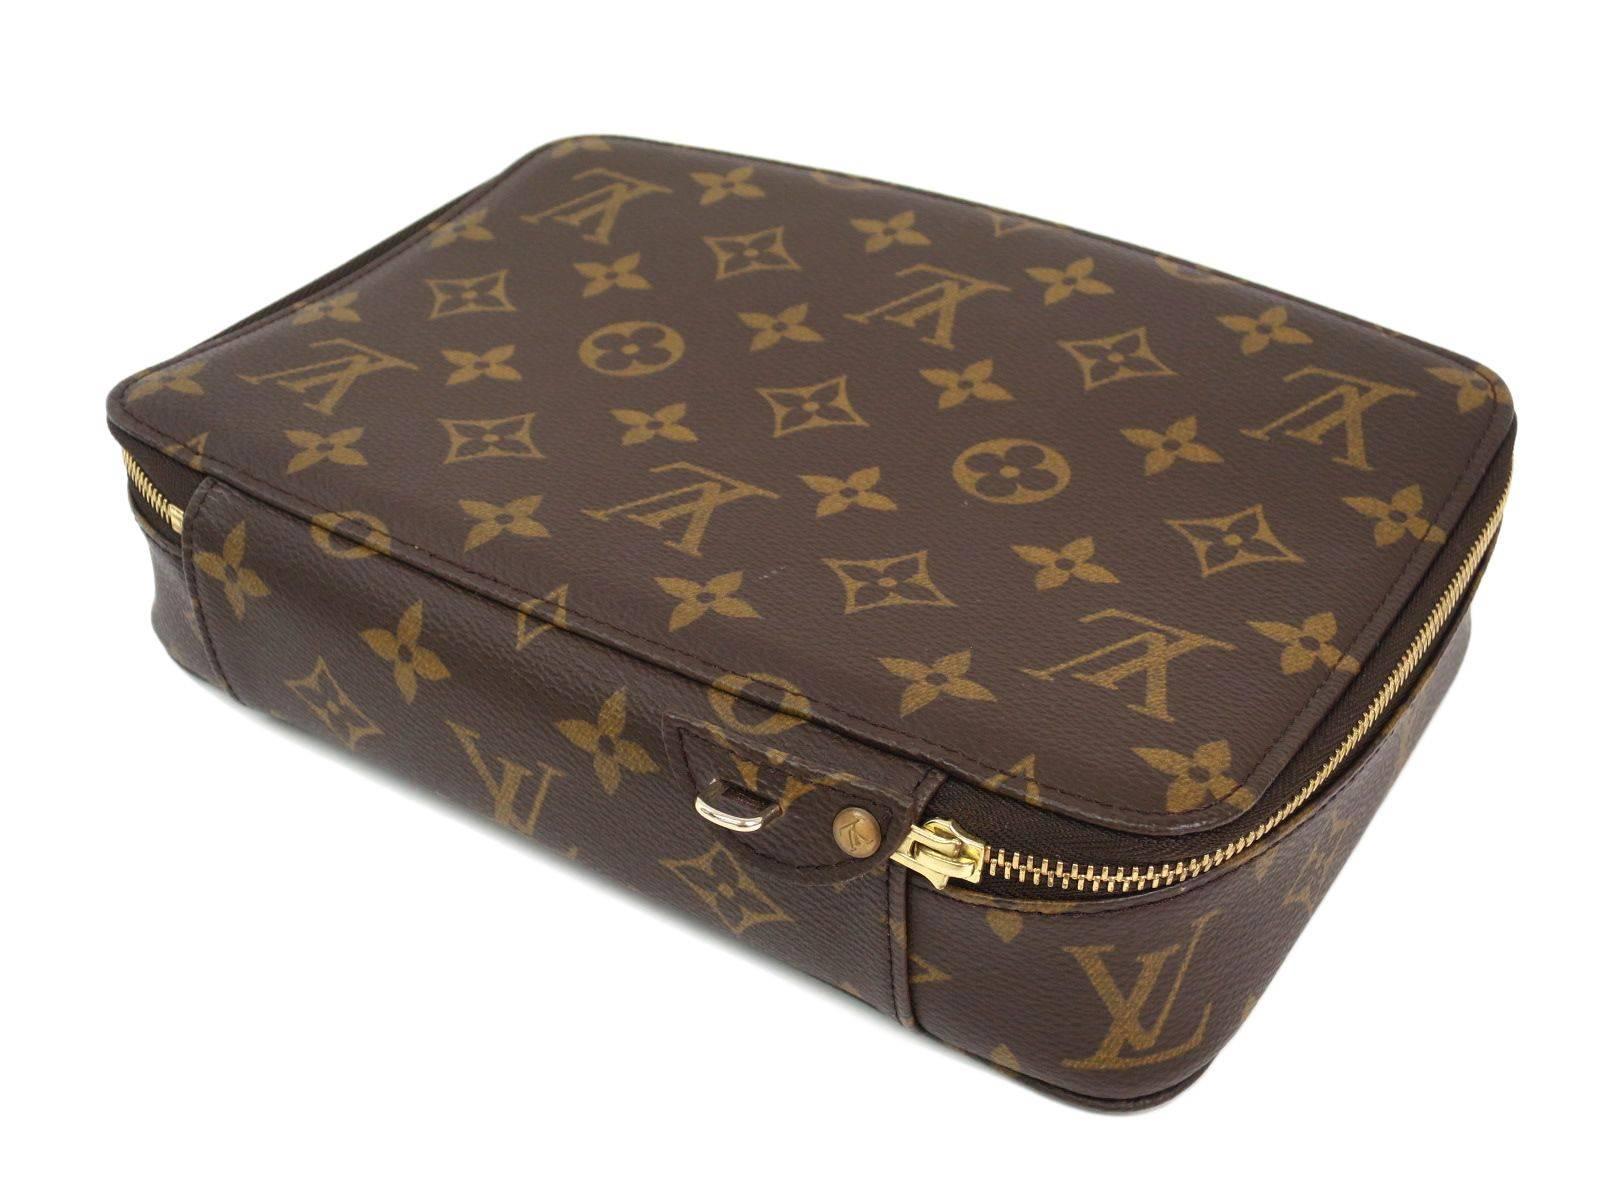 CURATOR'S NOTES

Monogram canvas
Gold hardware
Zipper closure
Made in France
Measures 8.7